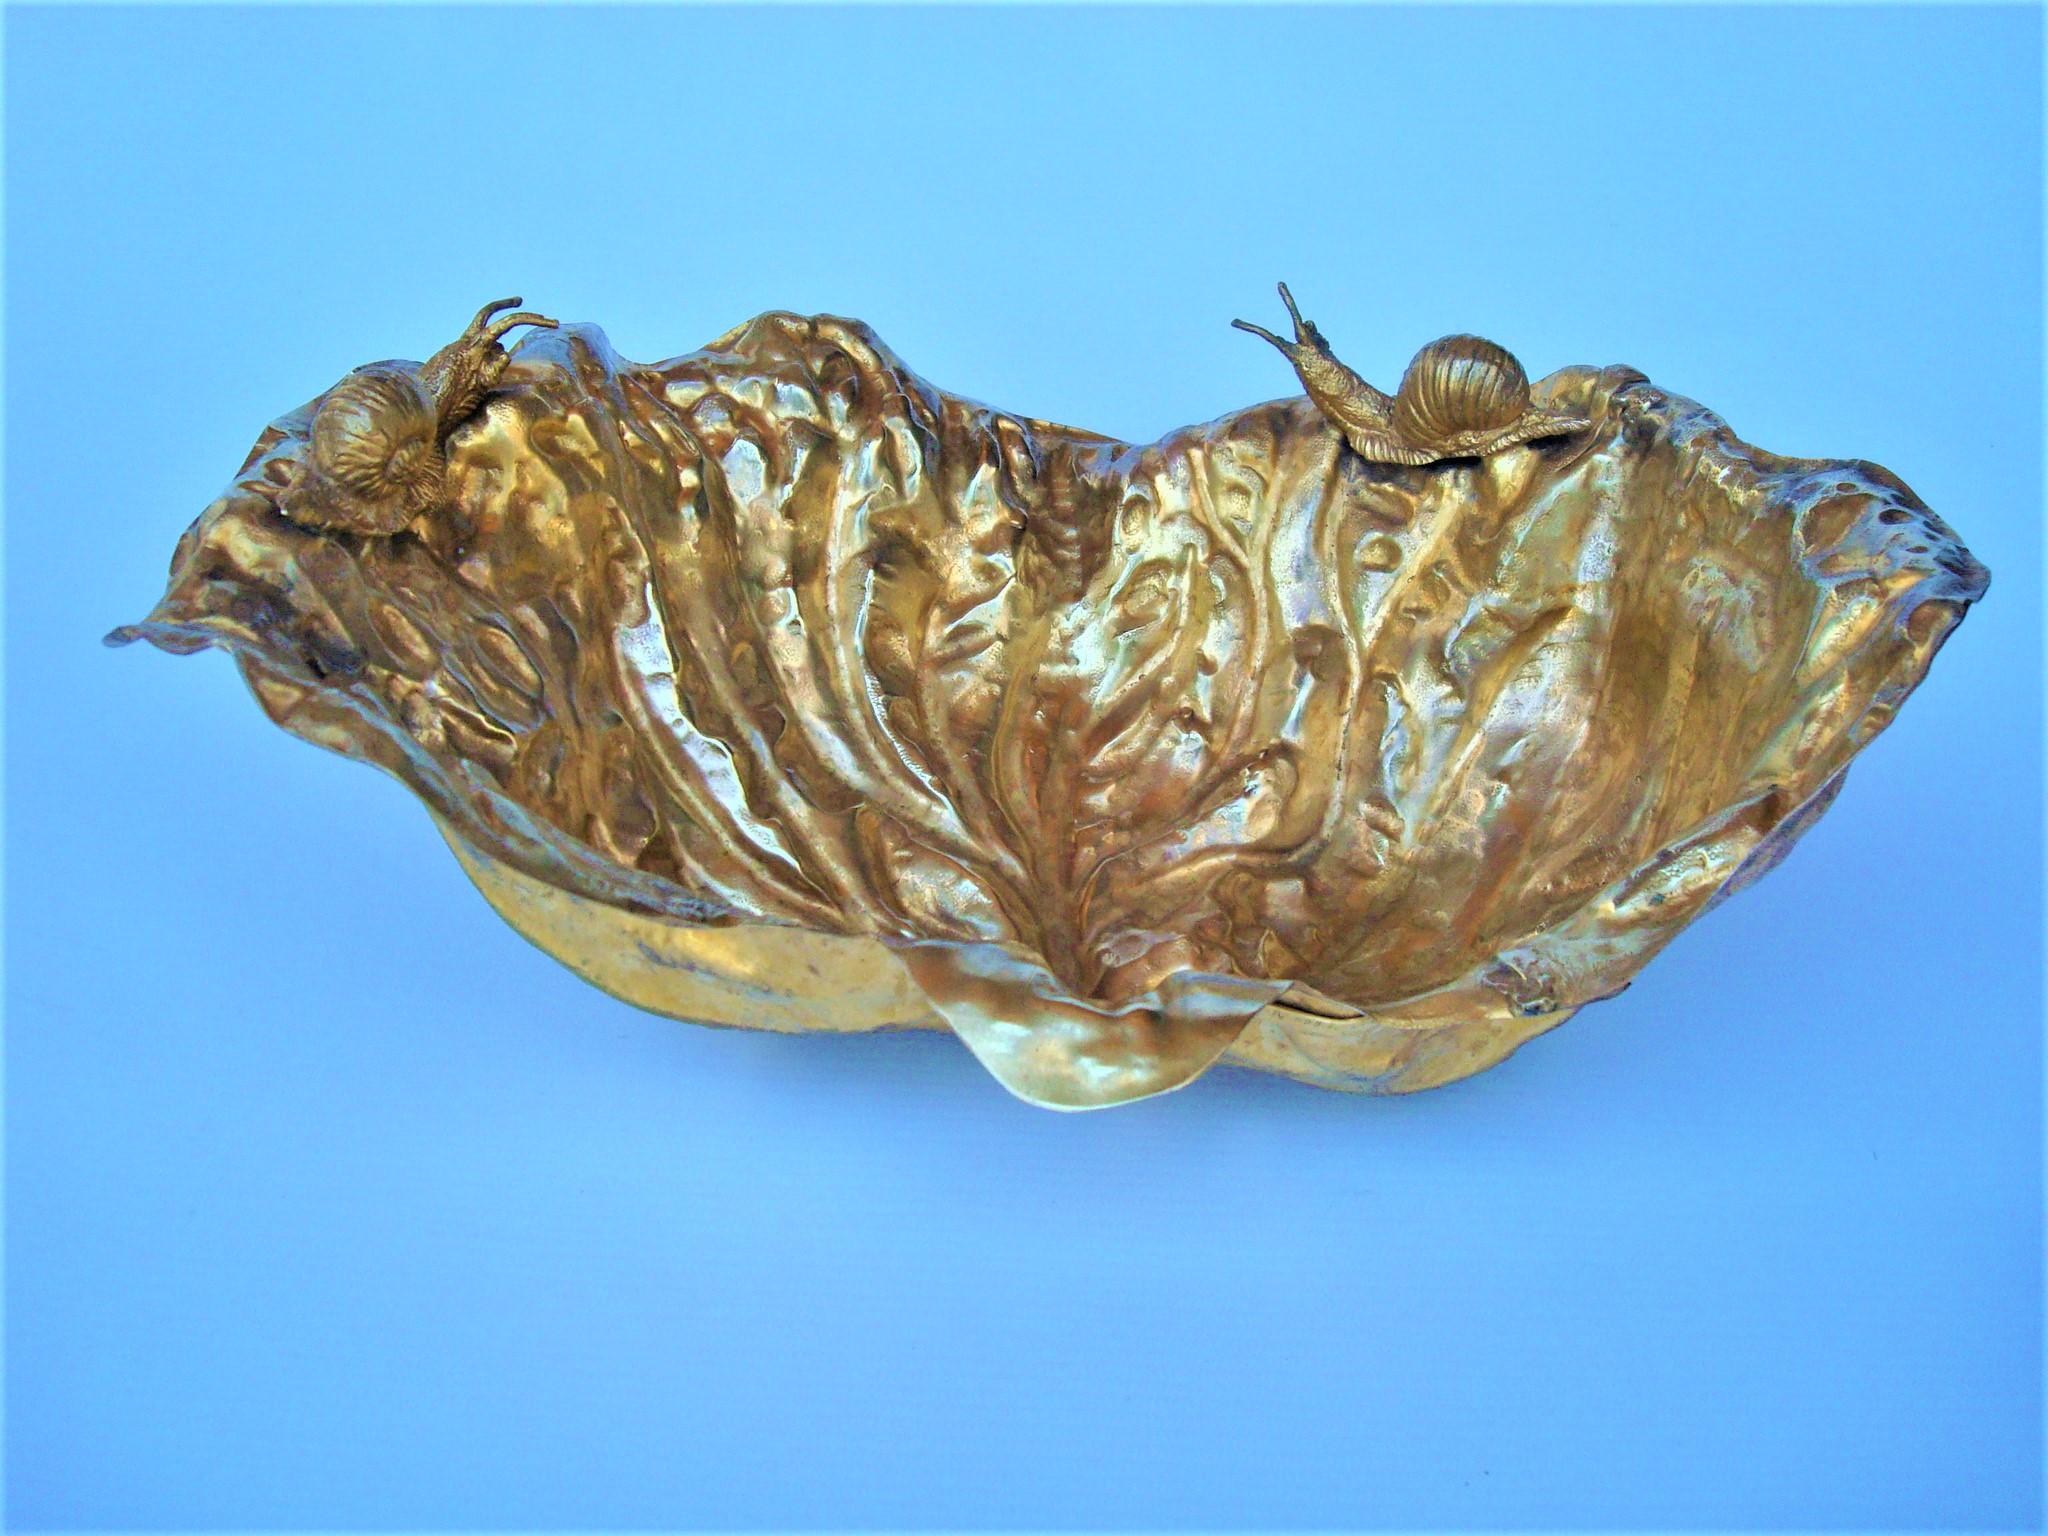 Rare Gilt bowl with snail supports designed by Gabriella Crespi for Christian Dior, made in Italy circa 1970 Part of the 